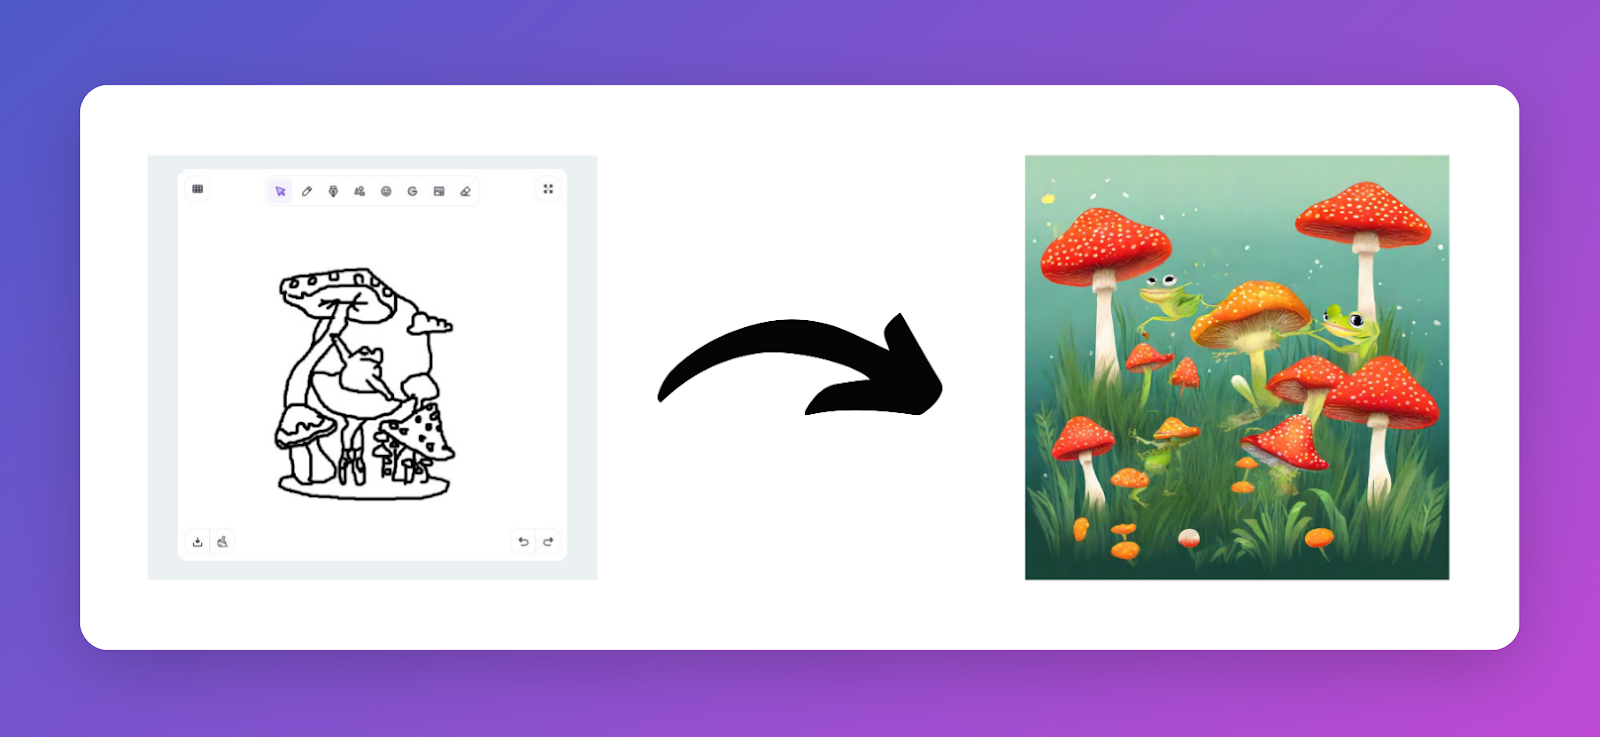 How to use AI to Craft Creative Designs in Seconds